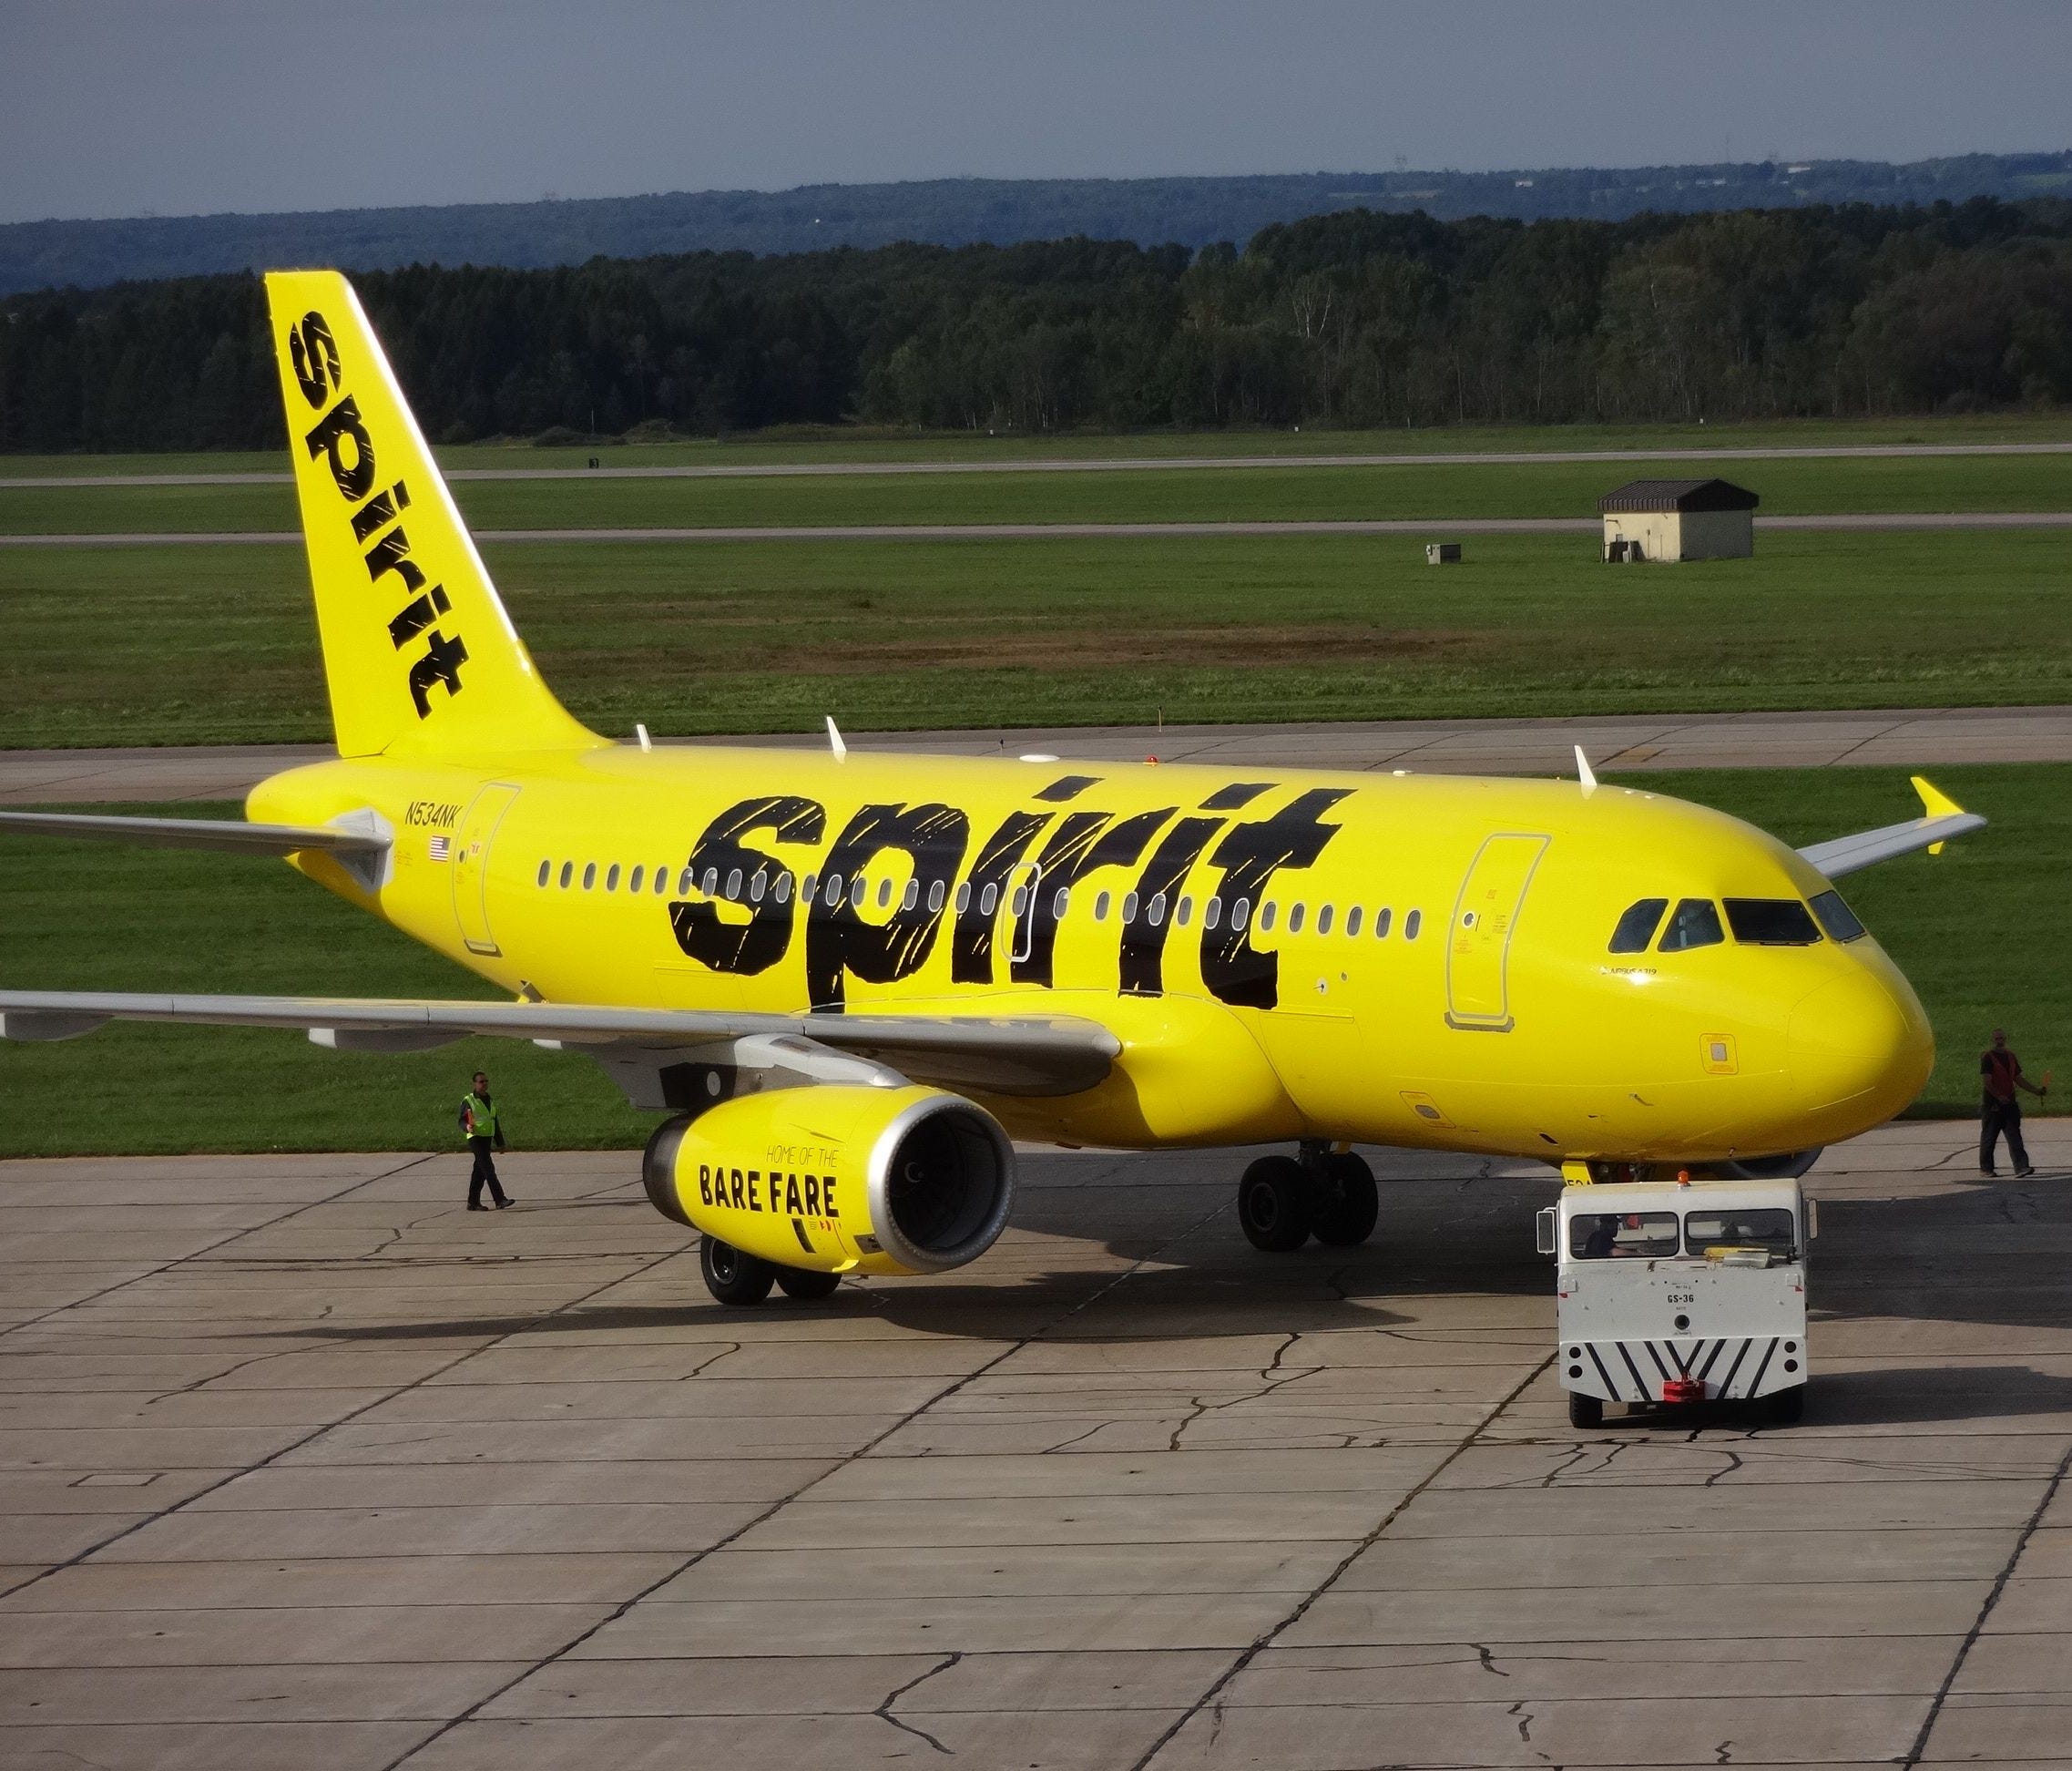 Spirit Airlines rolled this Airbus A319 painted in its new livery out for photographs in Rome, N.Y., on Sept. 15, 2014.